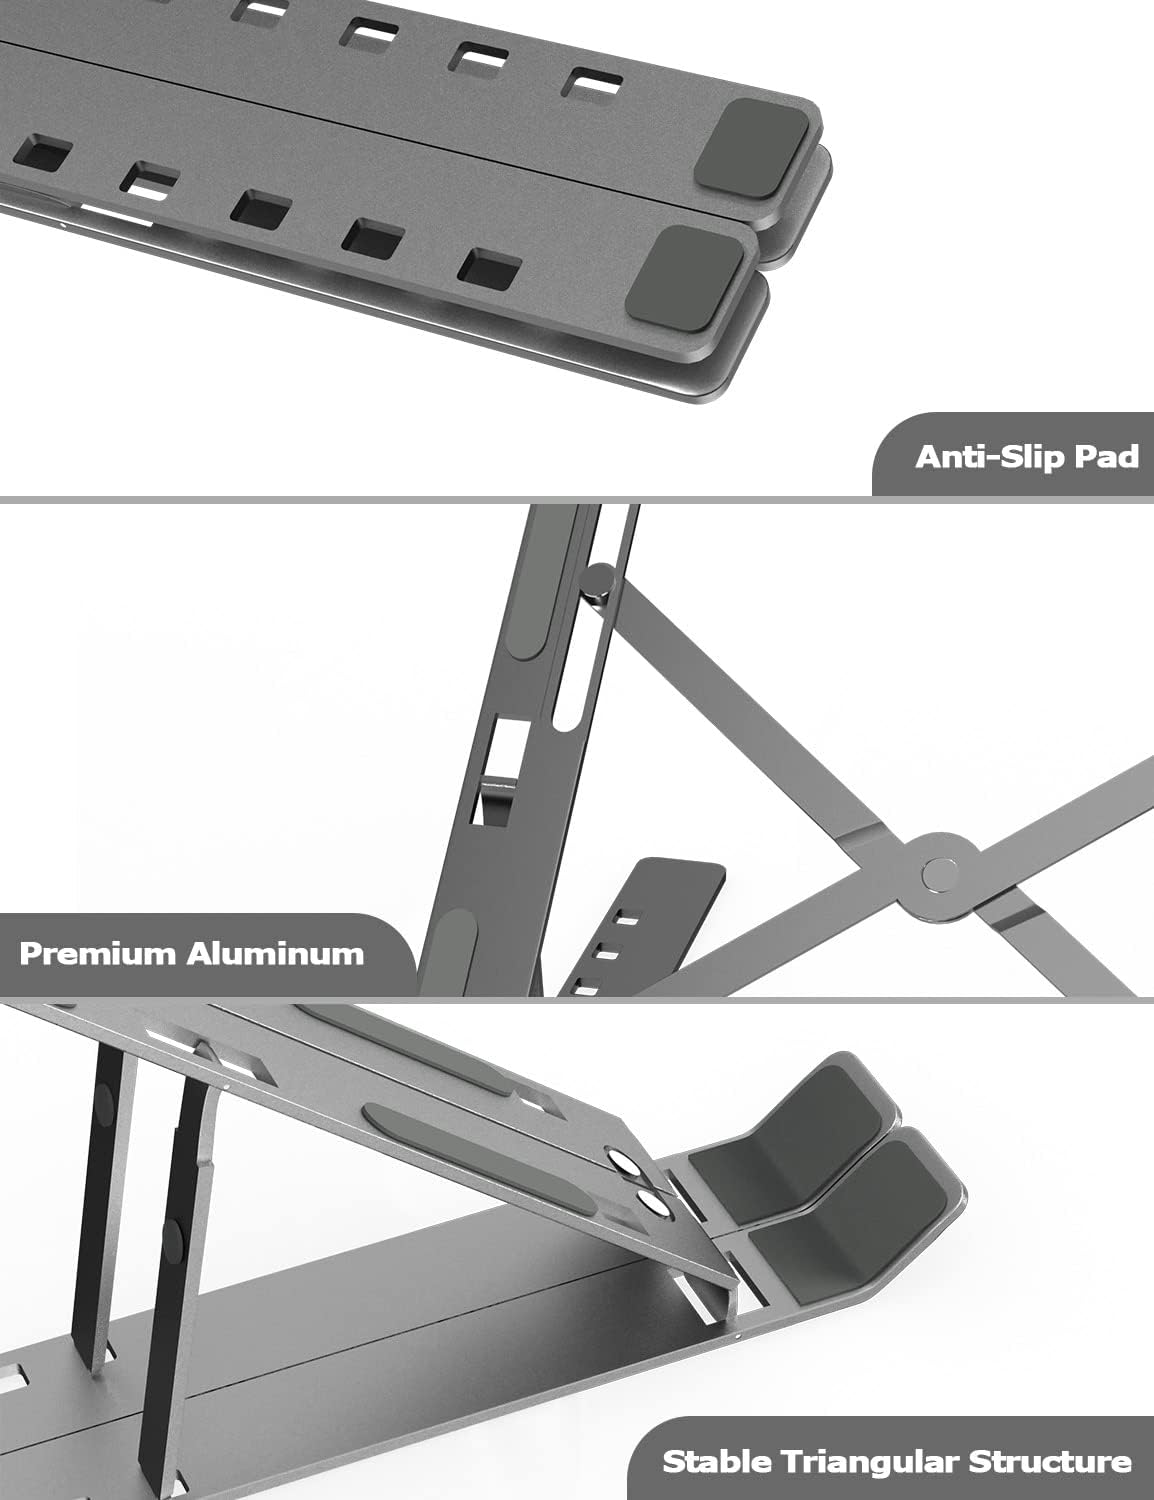 Portable Laptop Stand, PHOCAR Adjustable Tablet Notebook Stand for iPad, MacBook Pro, Laptop Desk Riser Foldable Notebook Cooling Stand for MacBook, Dell, Asus, Lenovoa